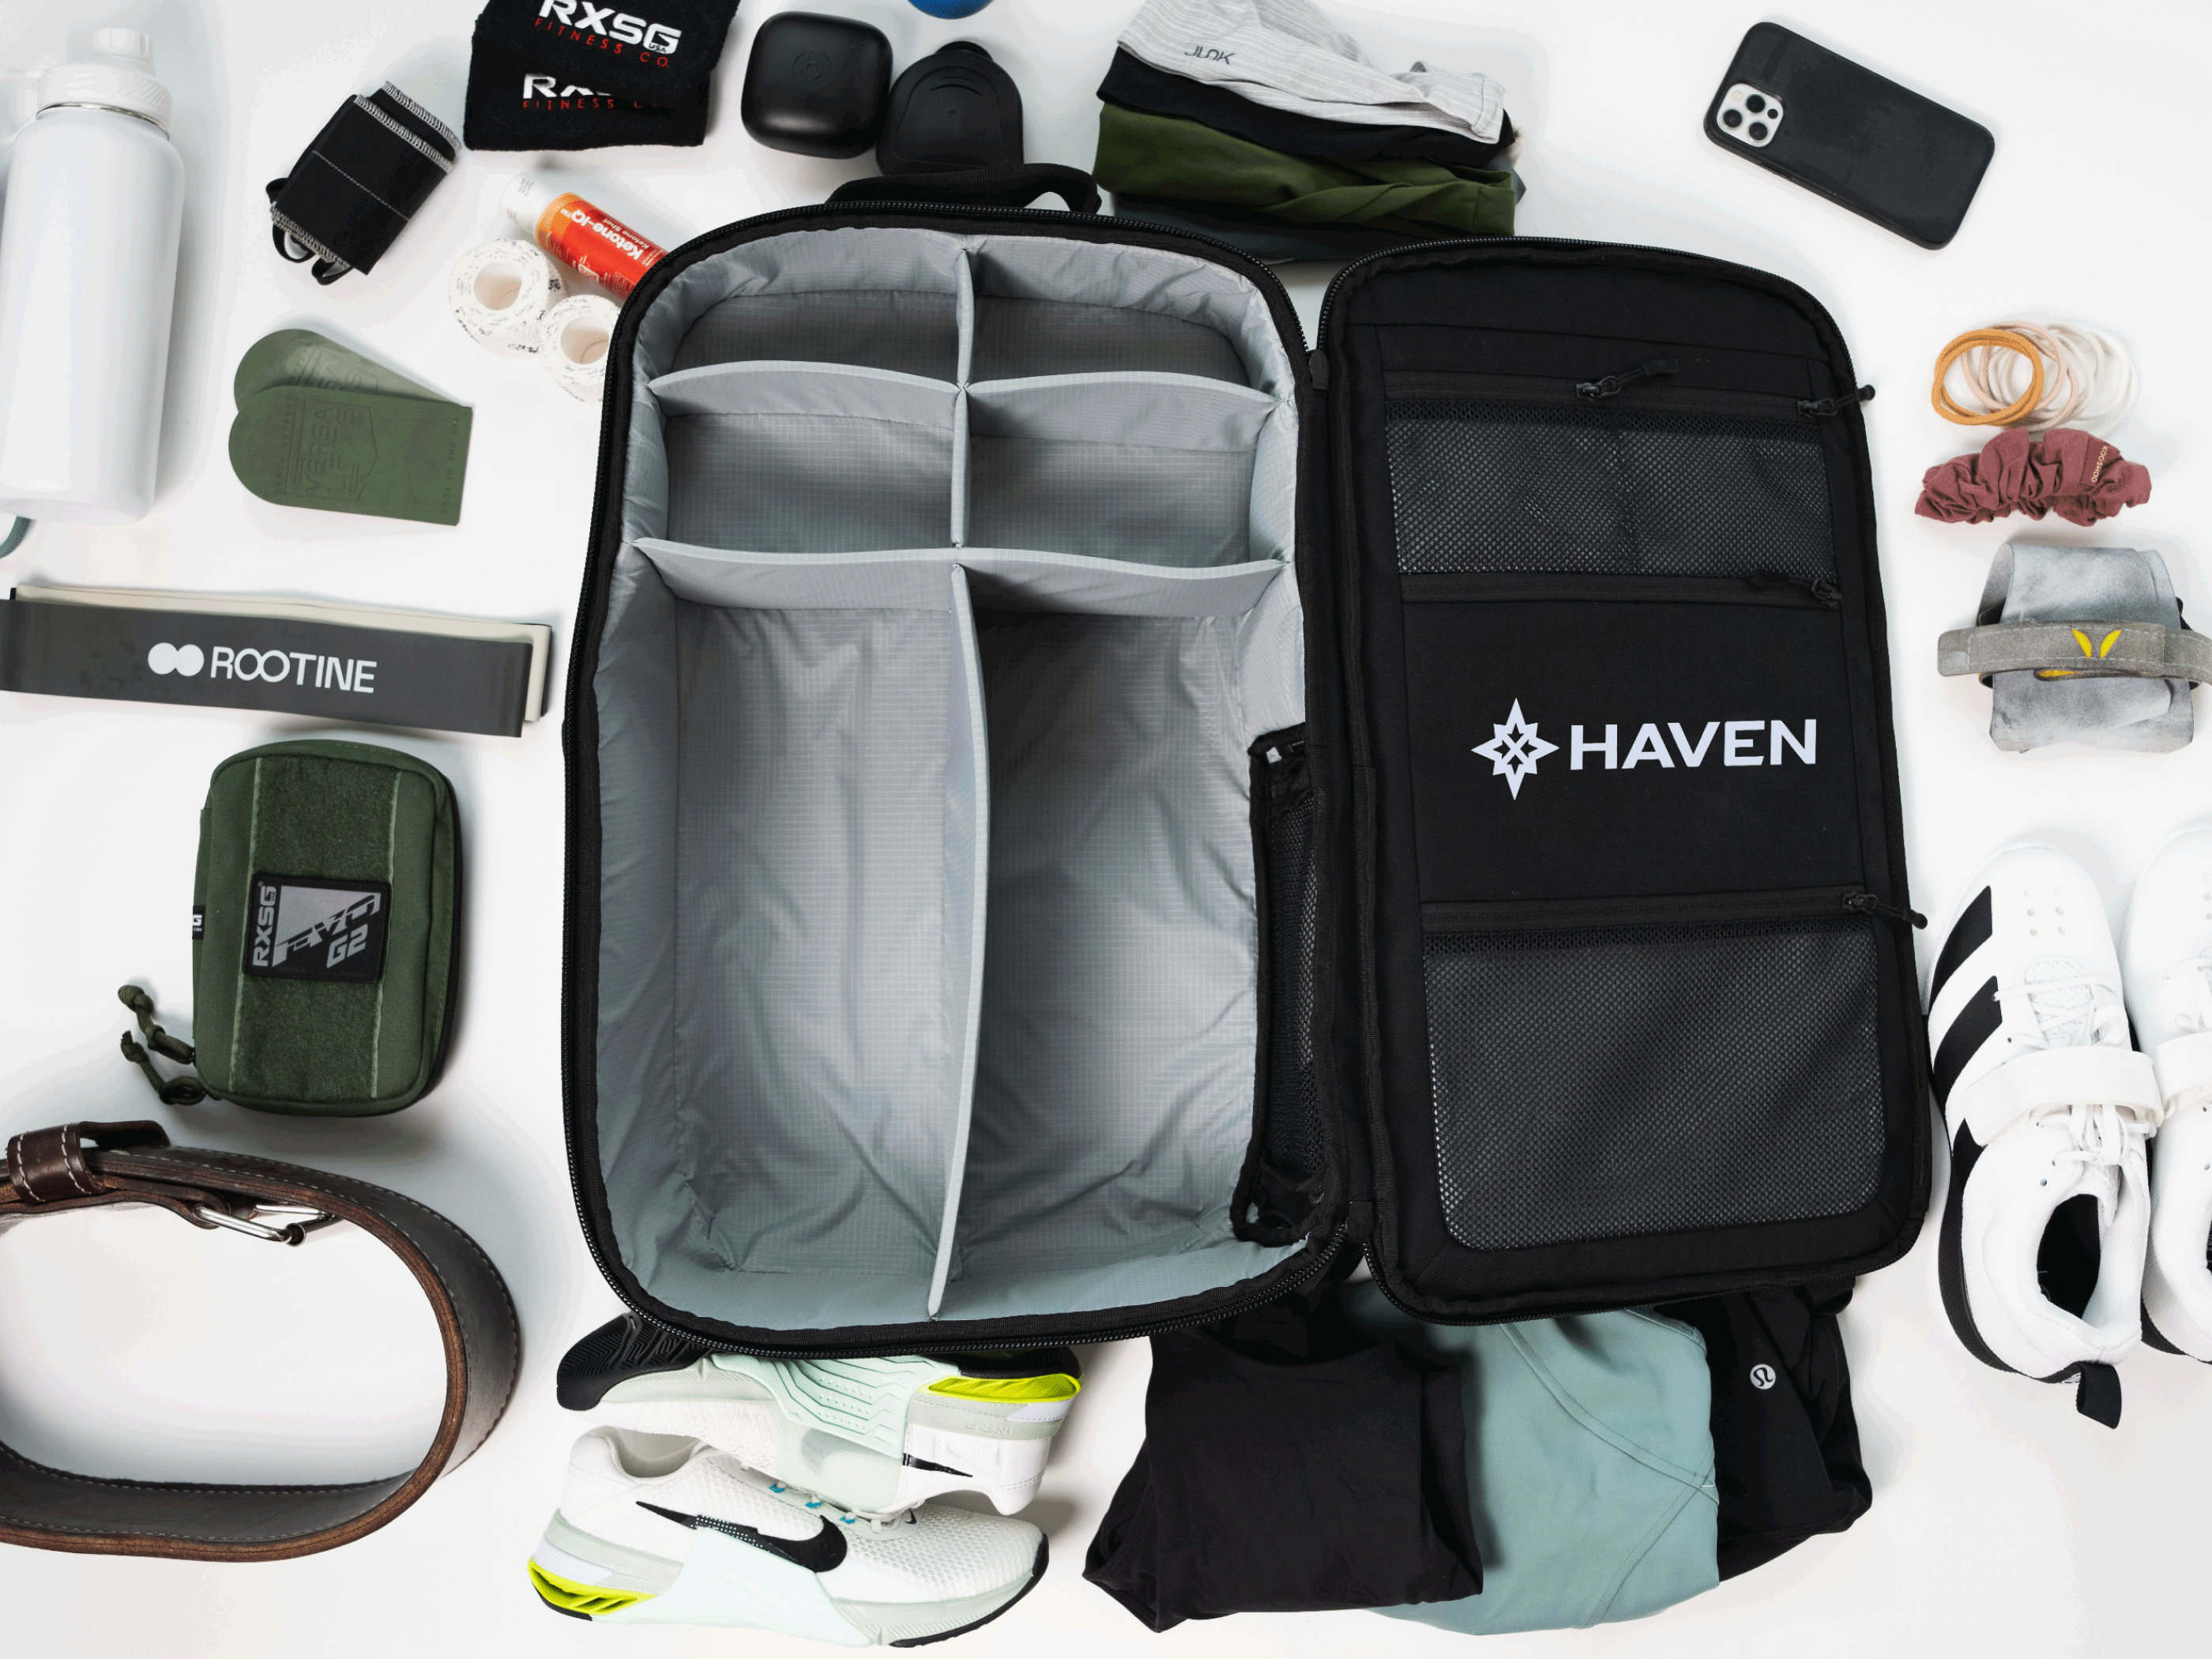 The Small Backpack - Organized Gym Bag | Haven Athletic